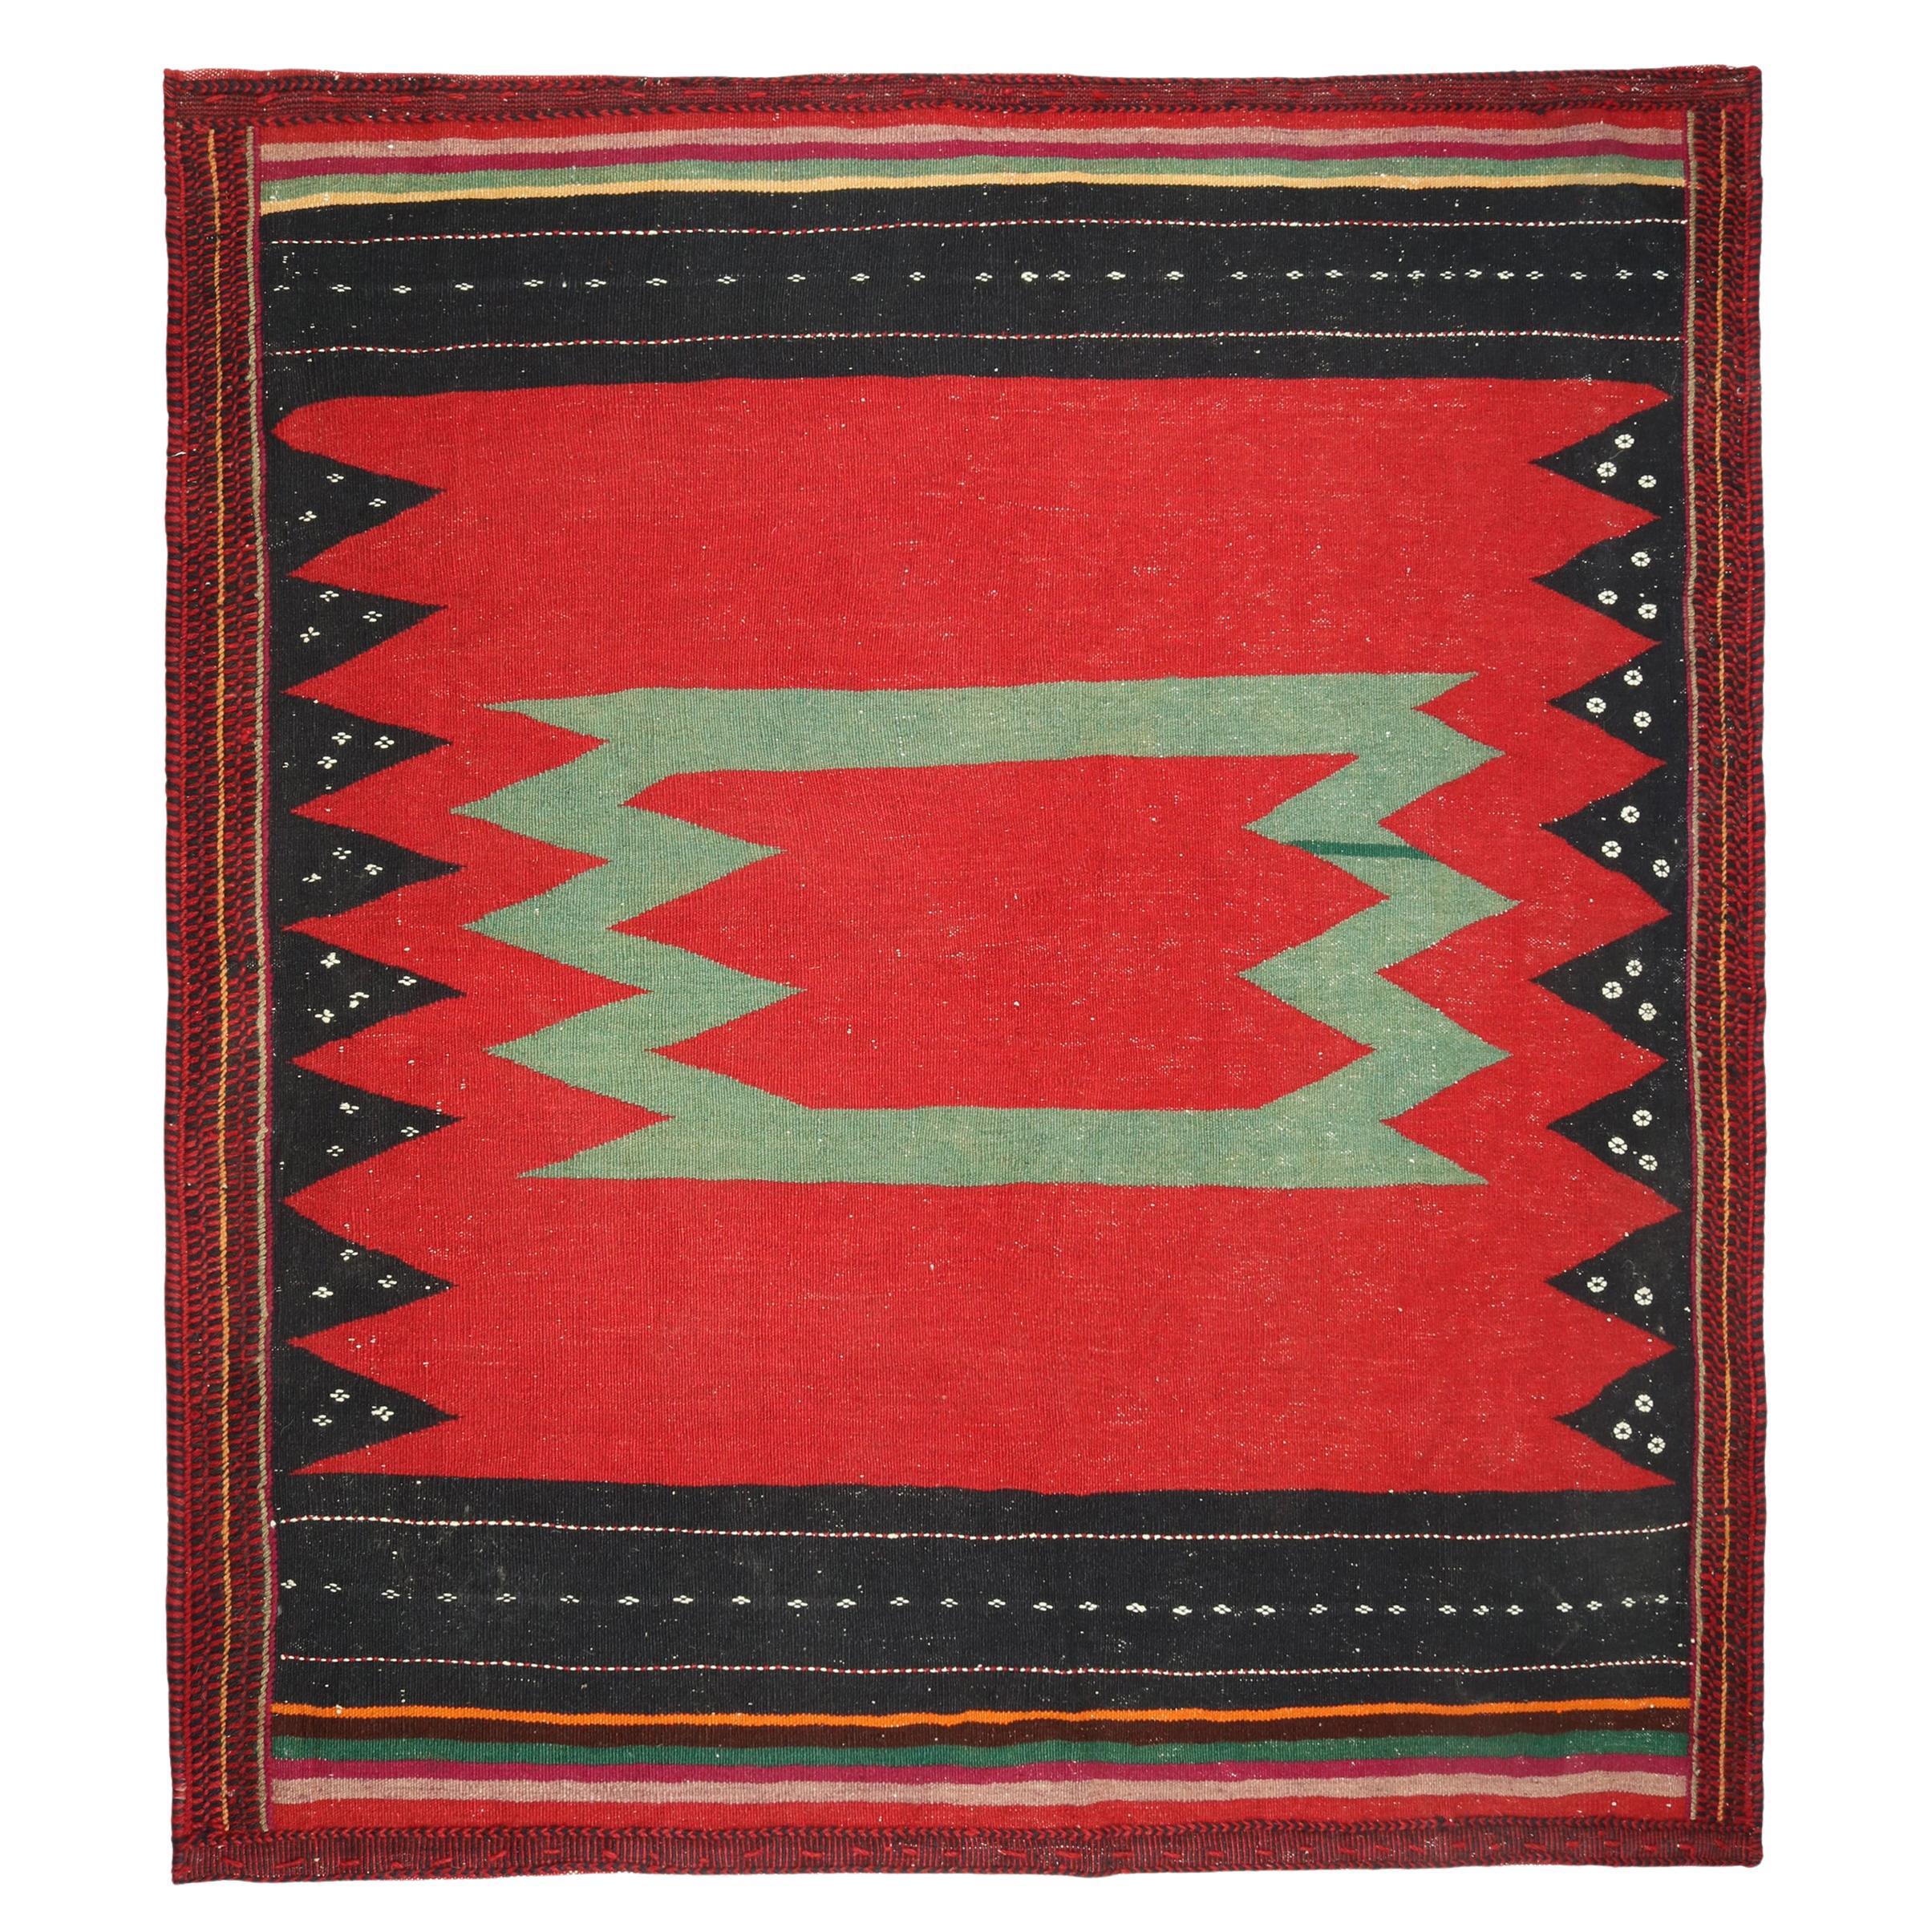 Vintage Sofreh Persian Kilim in Red with Teal and Black Pattern - by Rug & Kilim